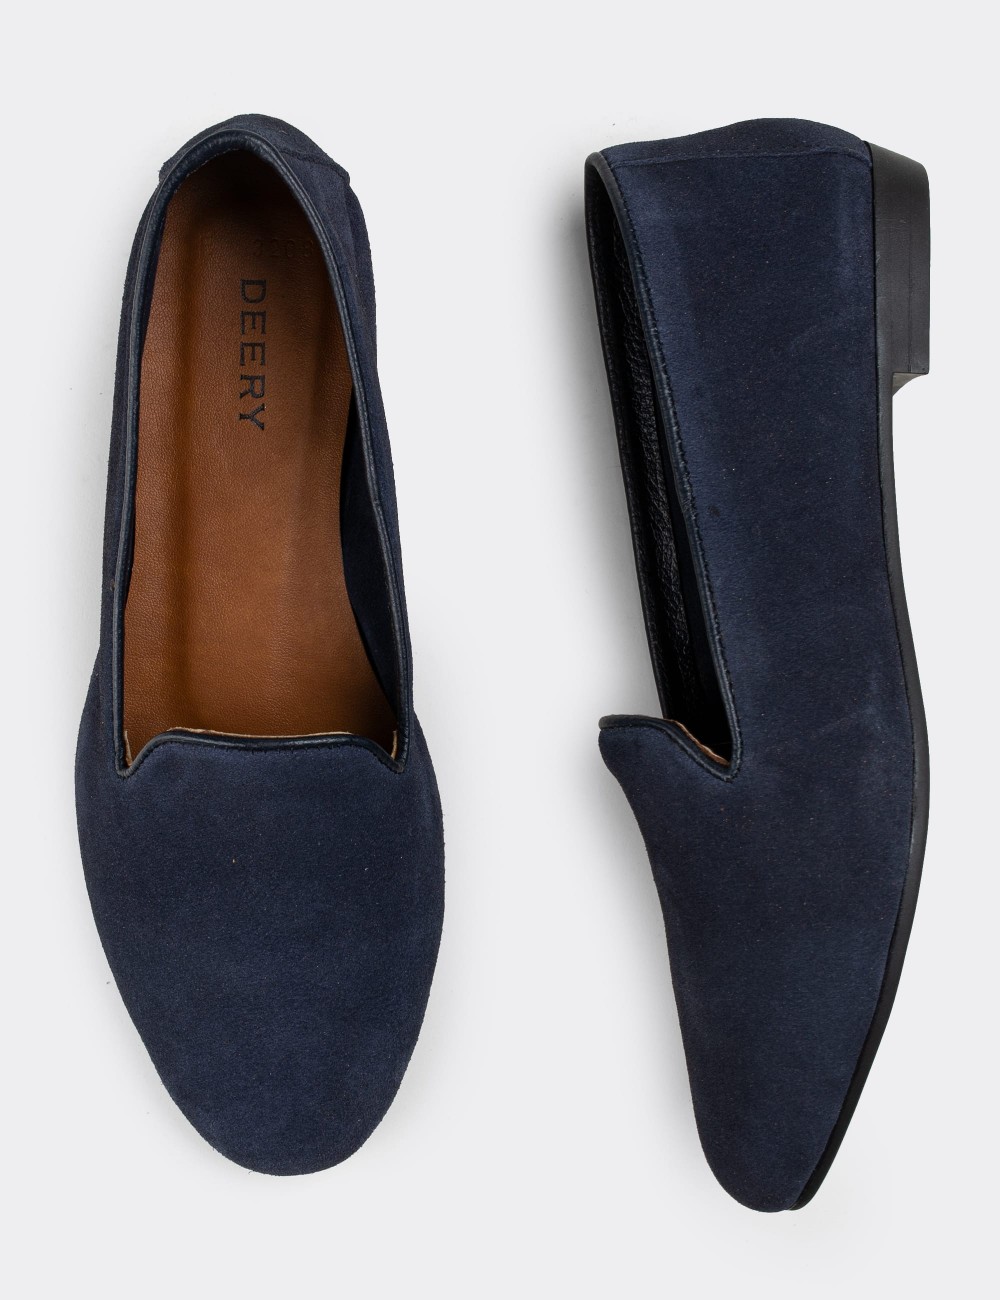 Navy Suede Leather Loafers  - E3208ZLCVC02